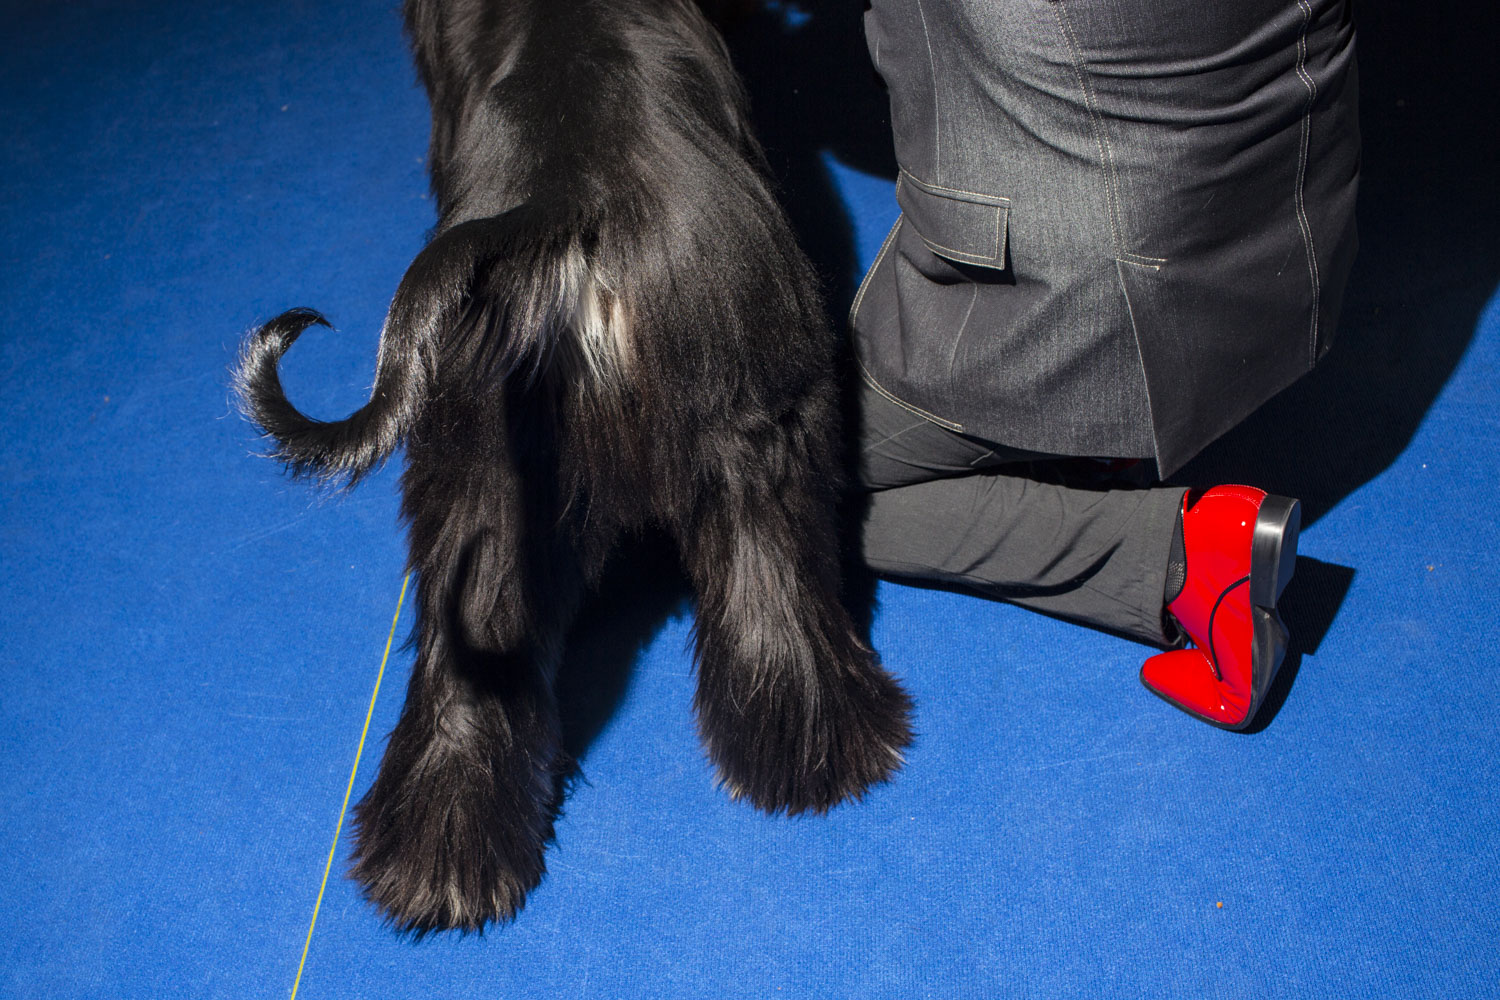 HELSINKI, FINLAND - AUG 9: Owner, breeder, and handler Sebastian Kurtowicz of Poland, kneels next to his Afghan Hound, Set, during judging on day two of the 2014 World Dog Show on Saturday, August 9th, 2014, in Helsinki, Finland. (Photo by Landon Nordeman)